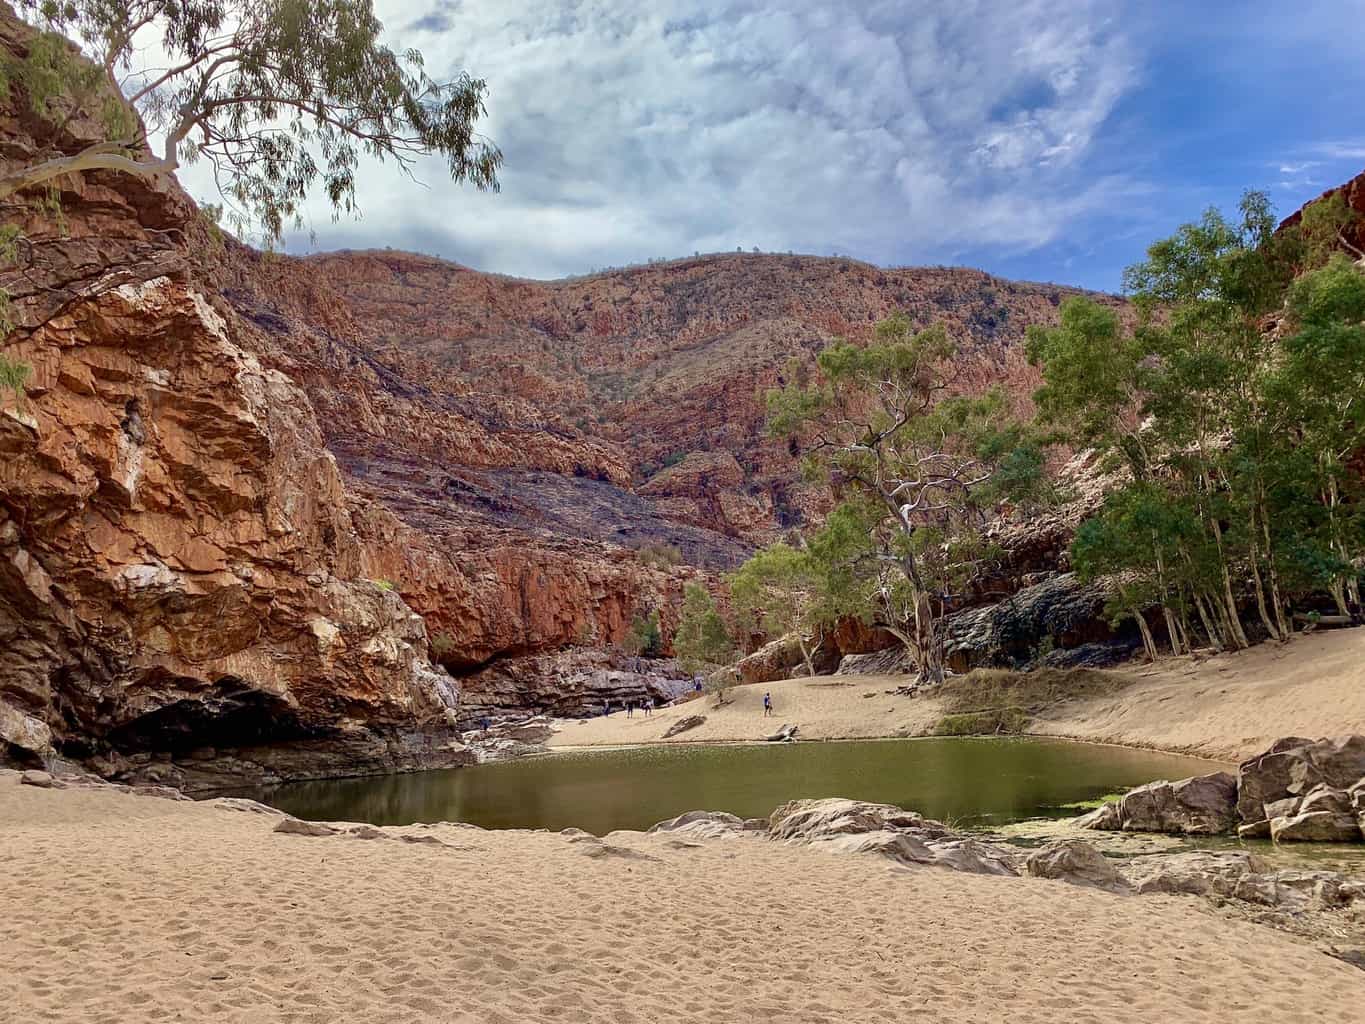 An Overview of the Ormiston Gorge